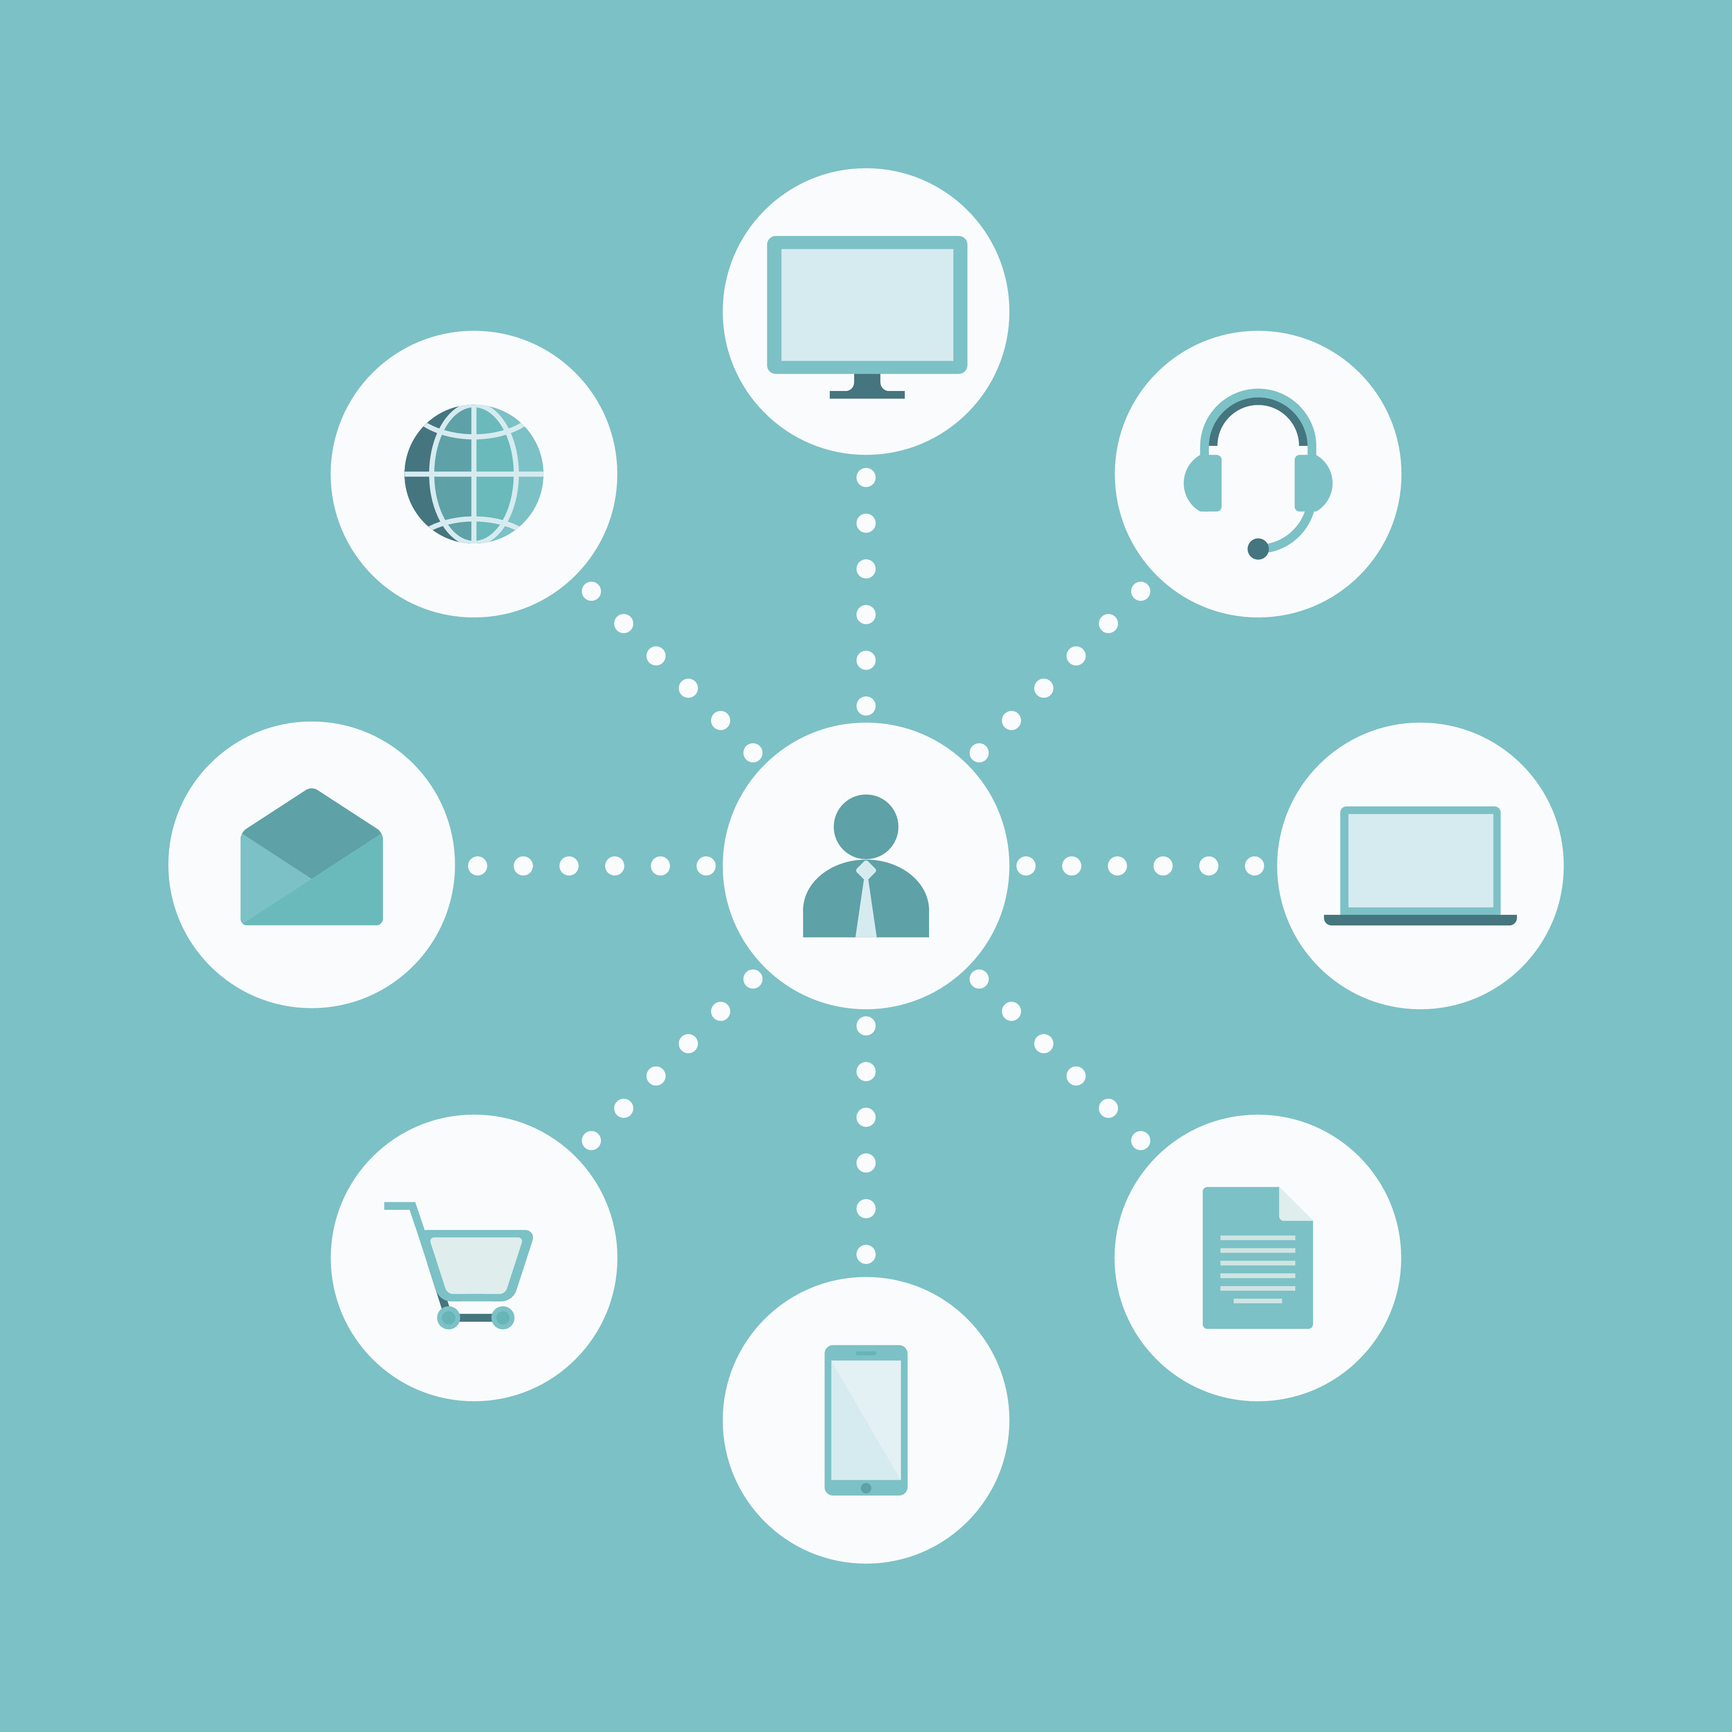 Why you should incorporate an omnichannel strategy.